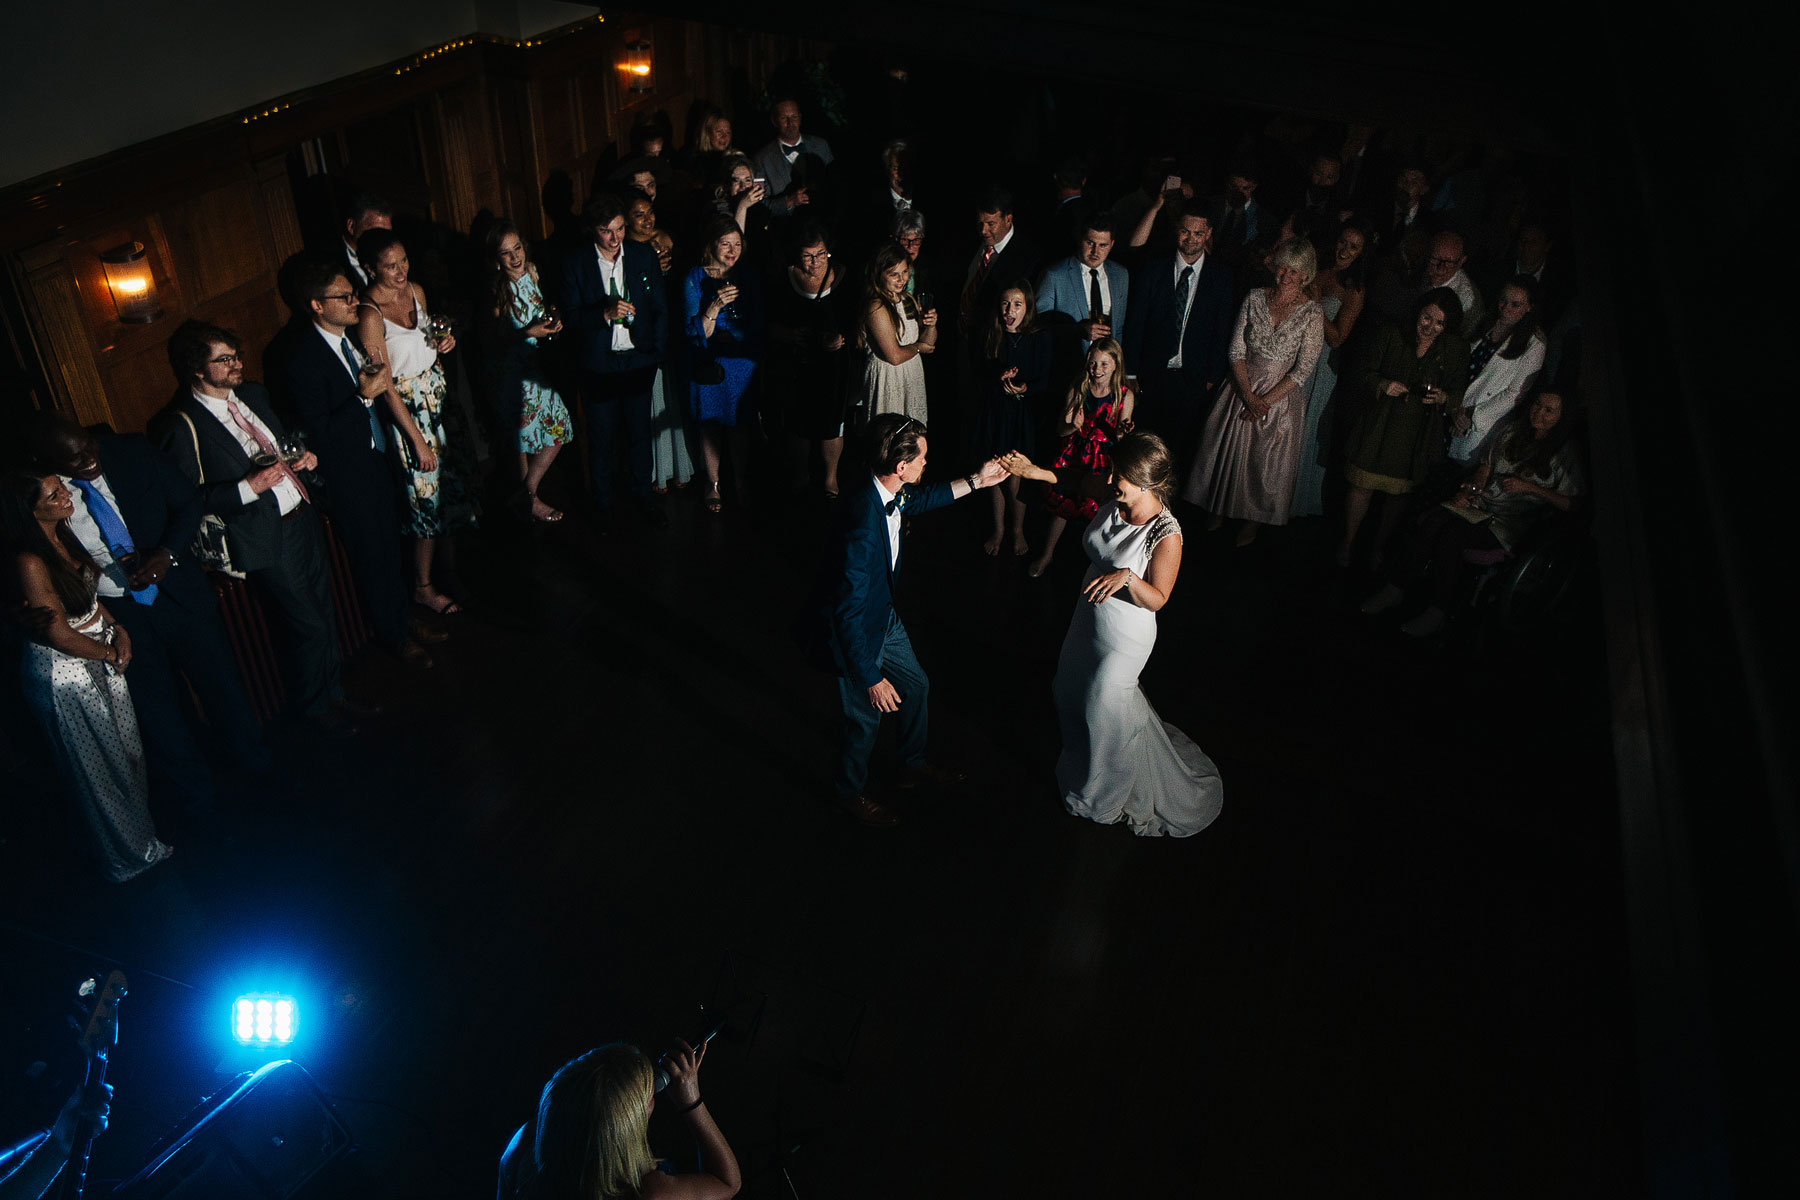 first dance at a wedding in ireland